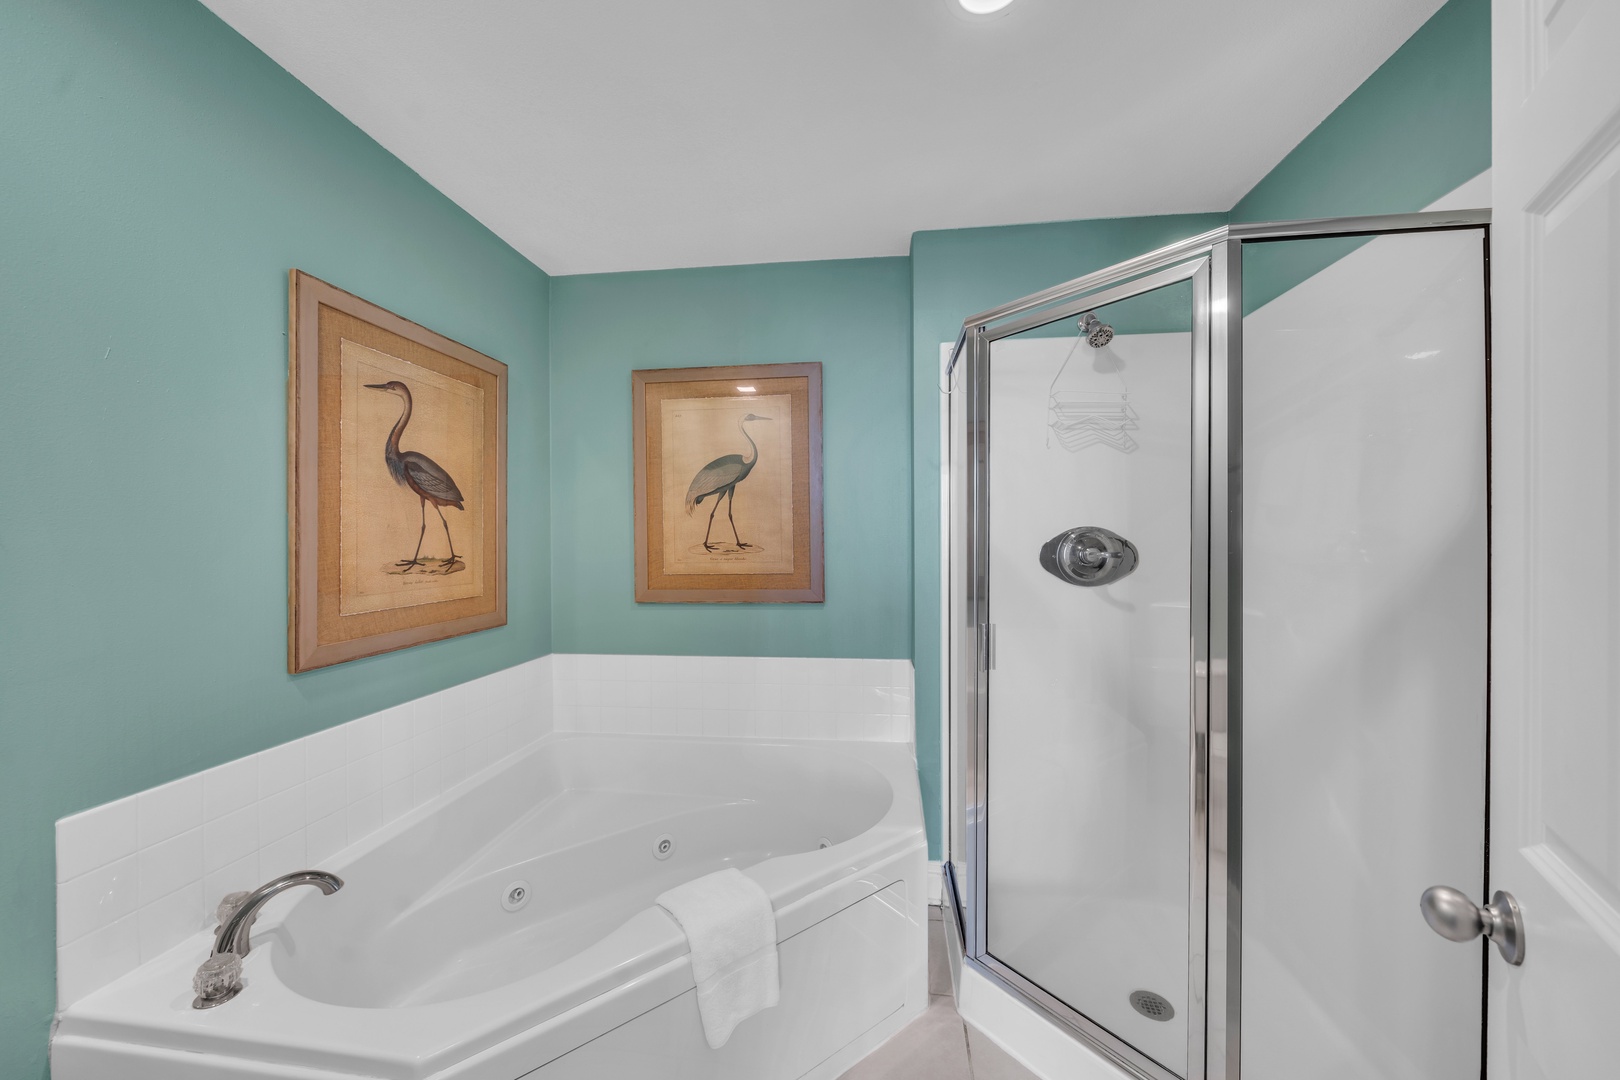 The Primary Bedroom has a jetted soaking tub, and a separate glass-enclosed shower.